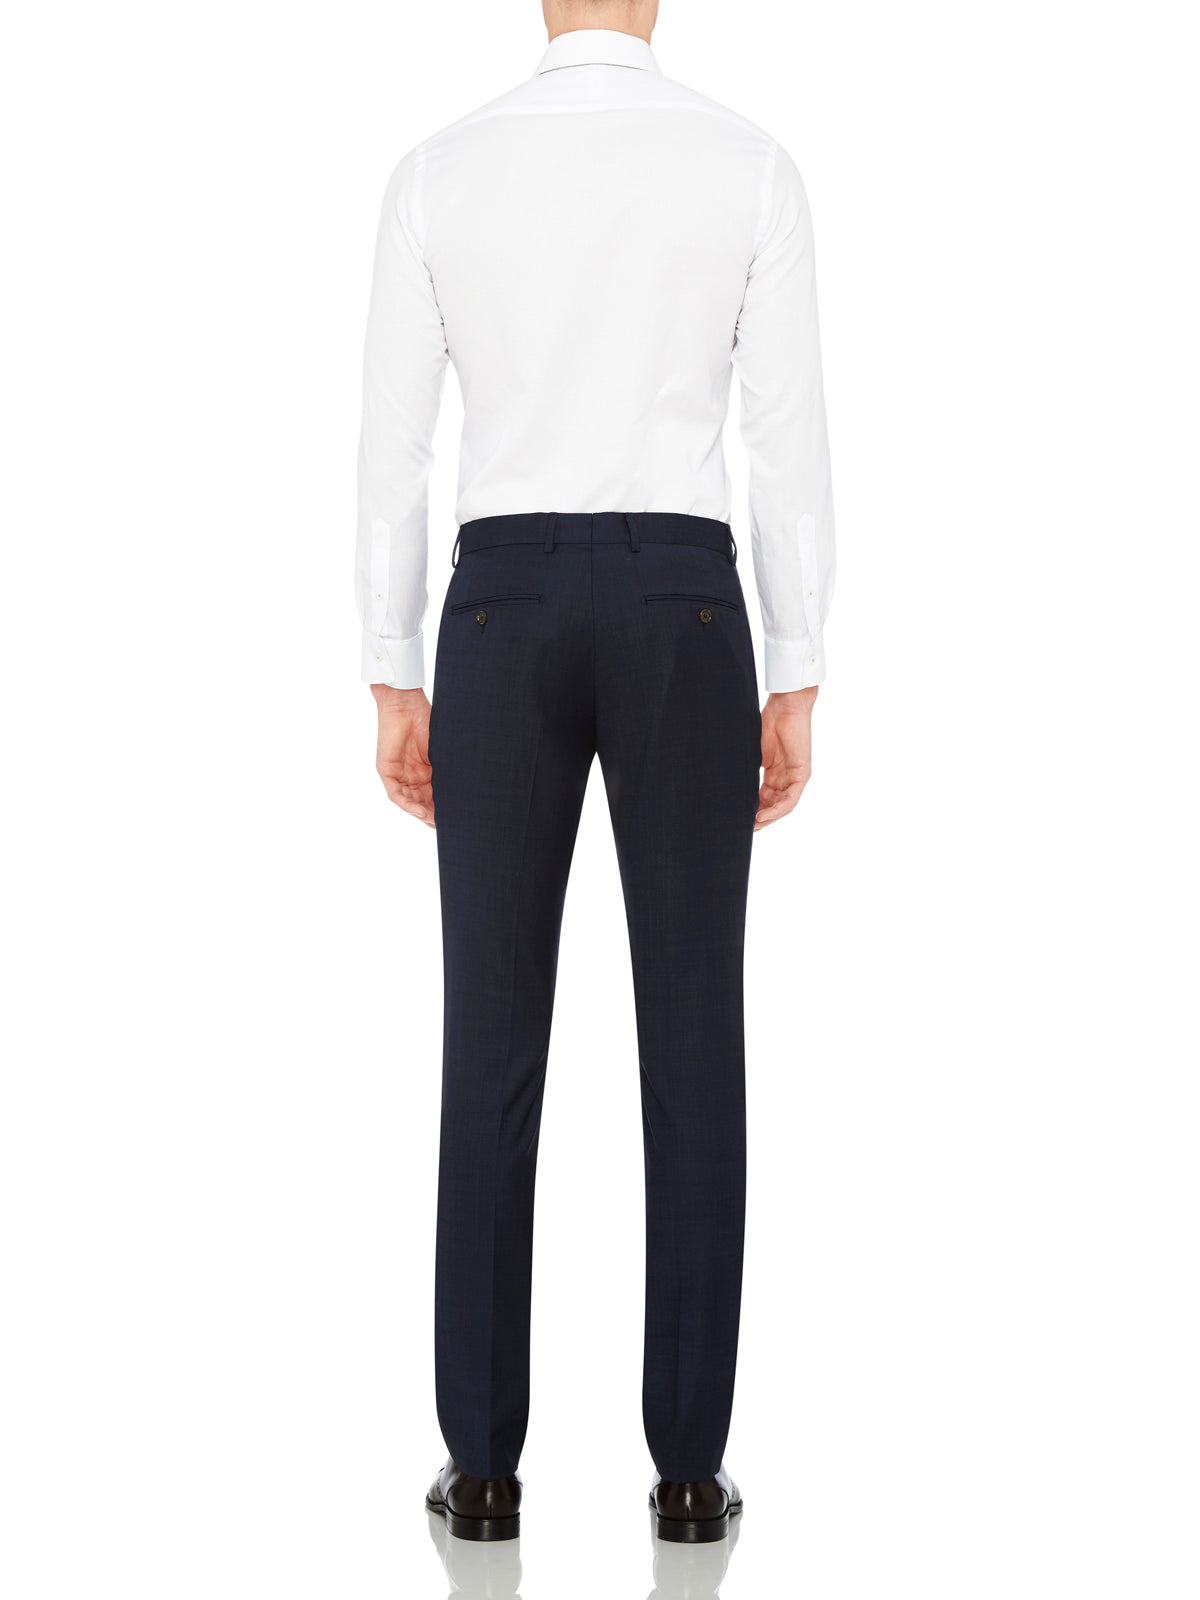 AUDEN WOOL TROUSERS CHARCOAL